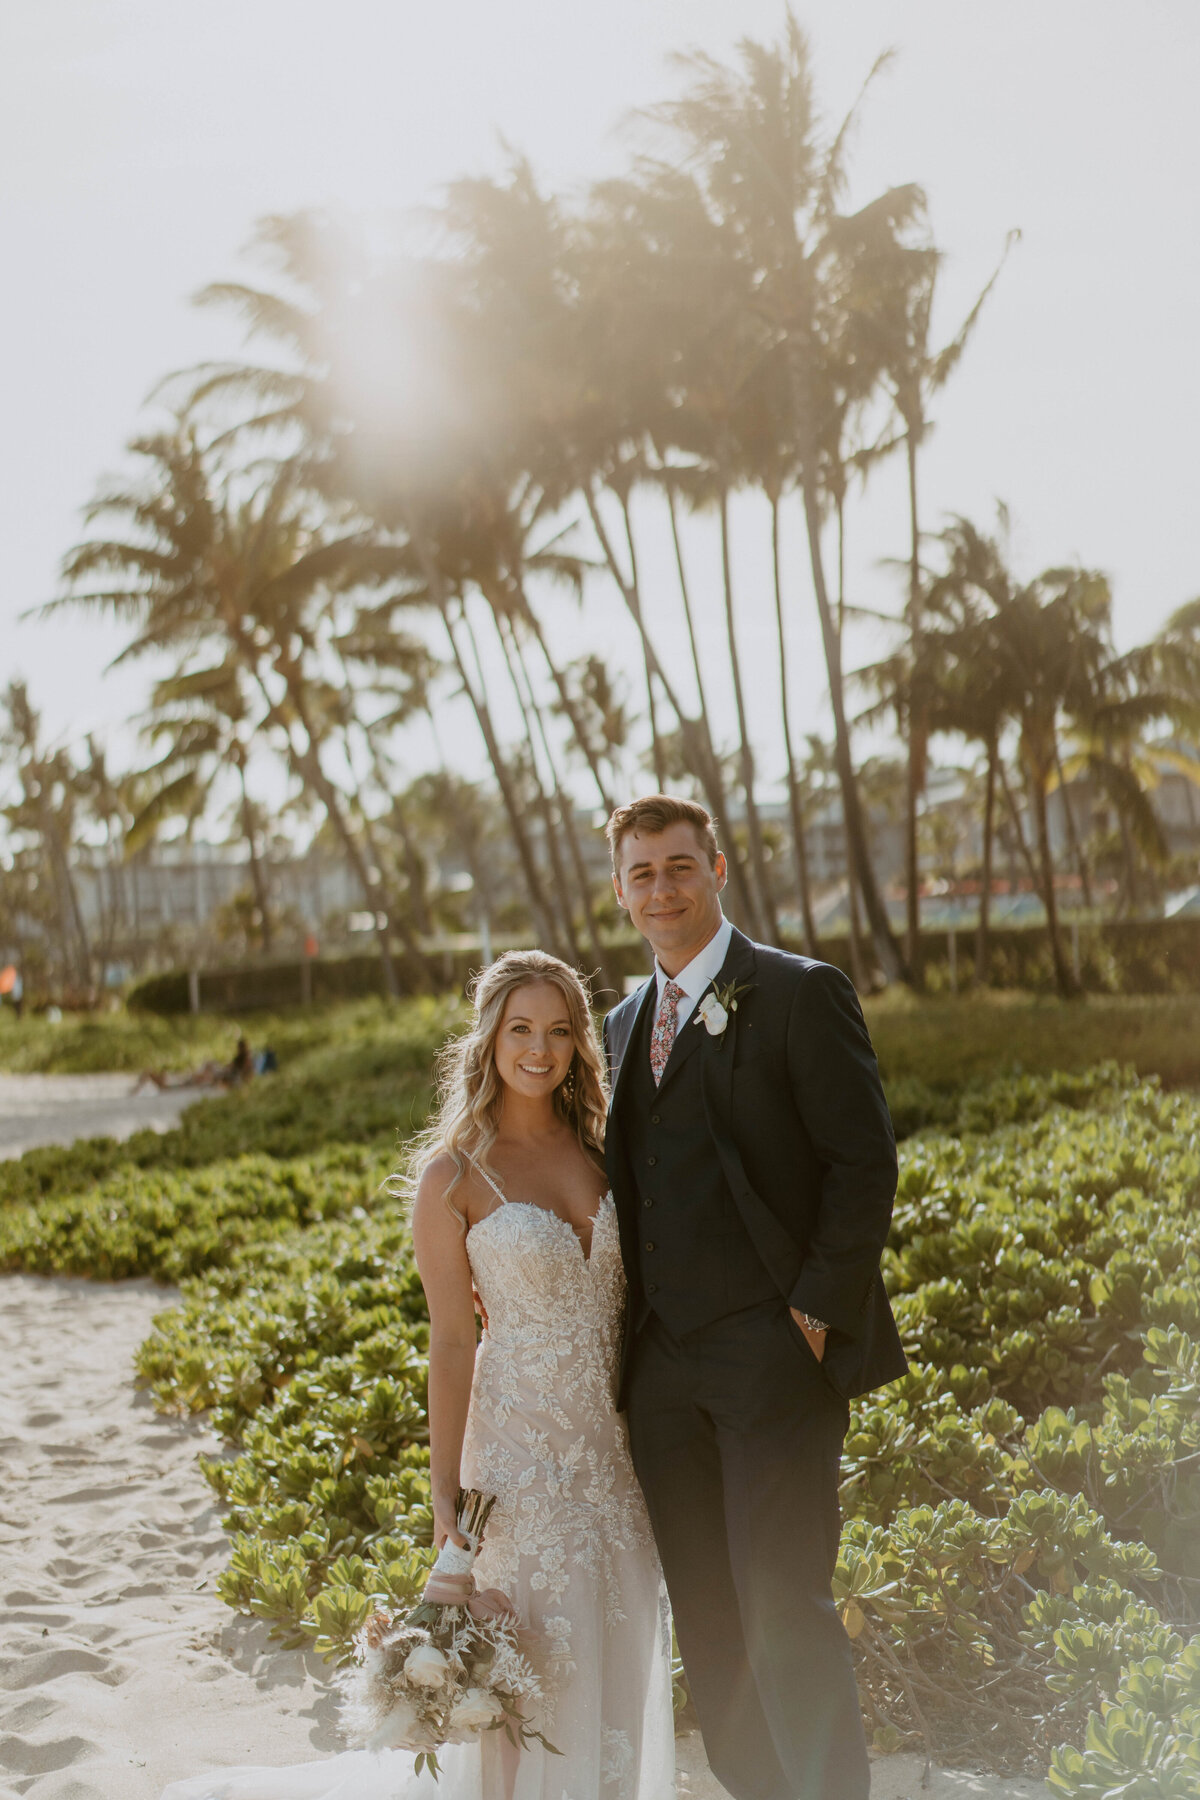 Nicole and Ethan got married at one of the many beautiful beaches in Hawaii.